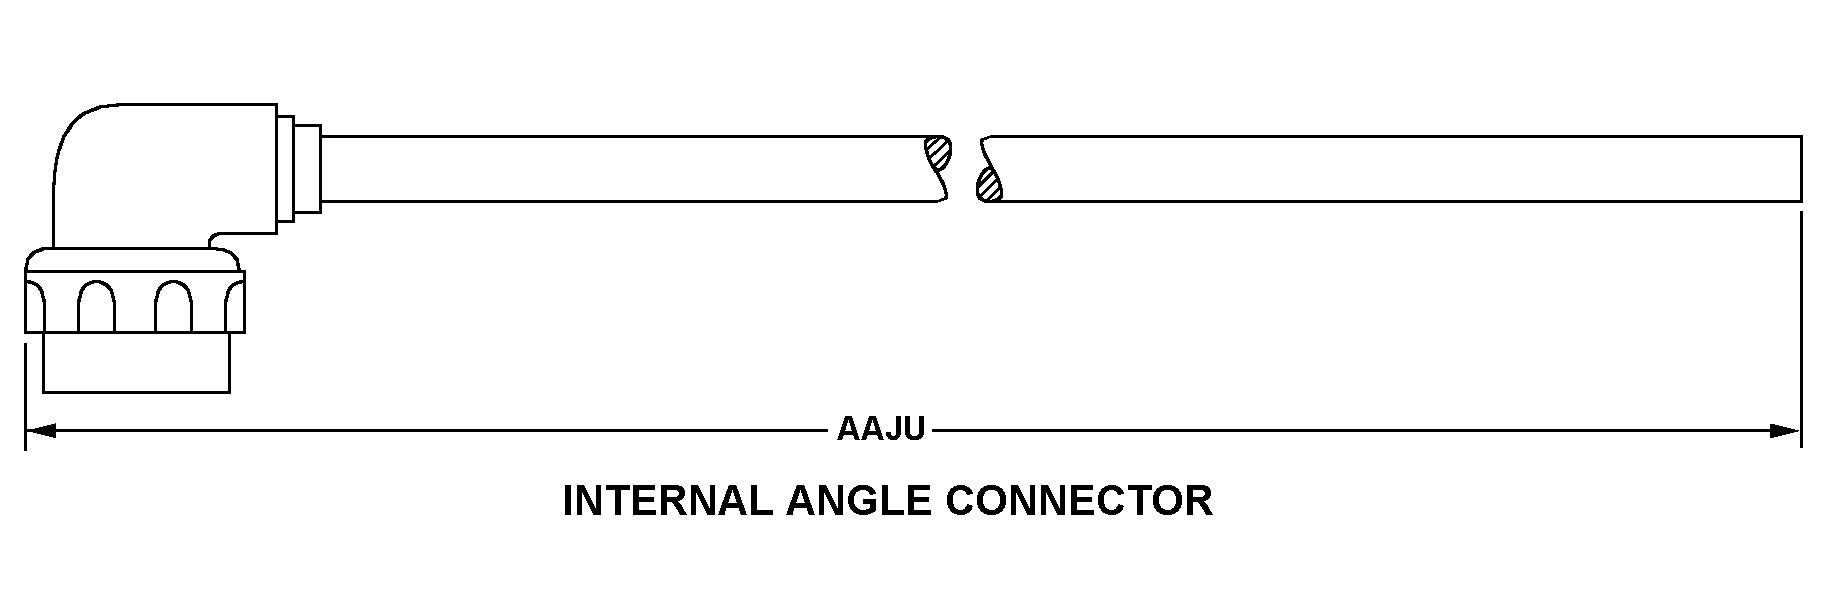 INTERNAL ANGLE CONNECTOR style nsn 5995-01-085-7883